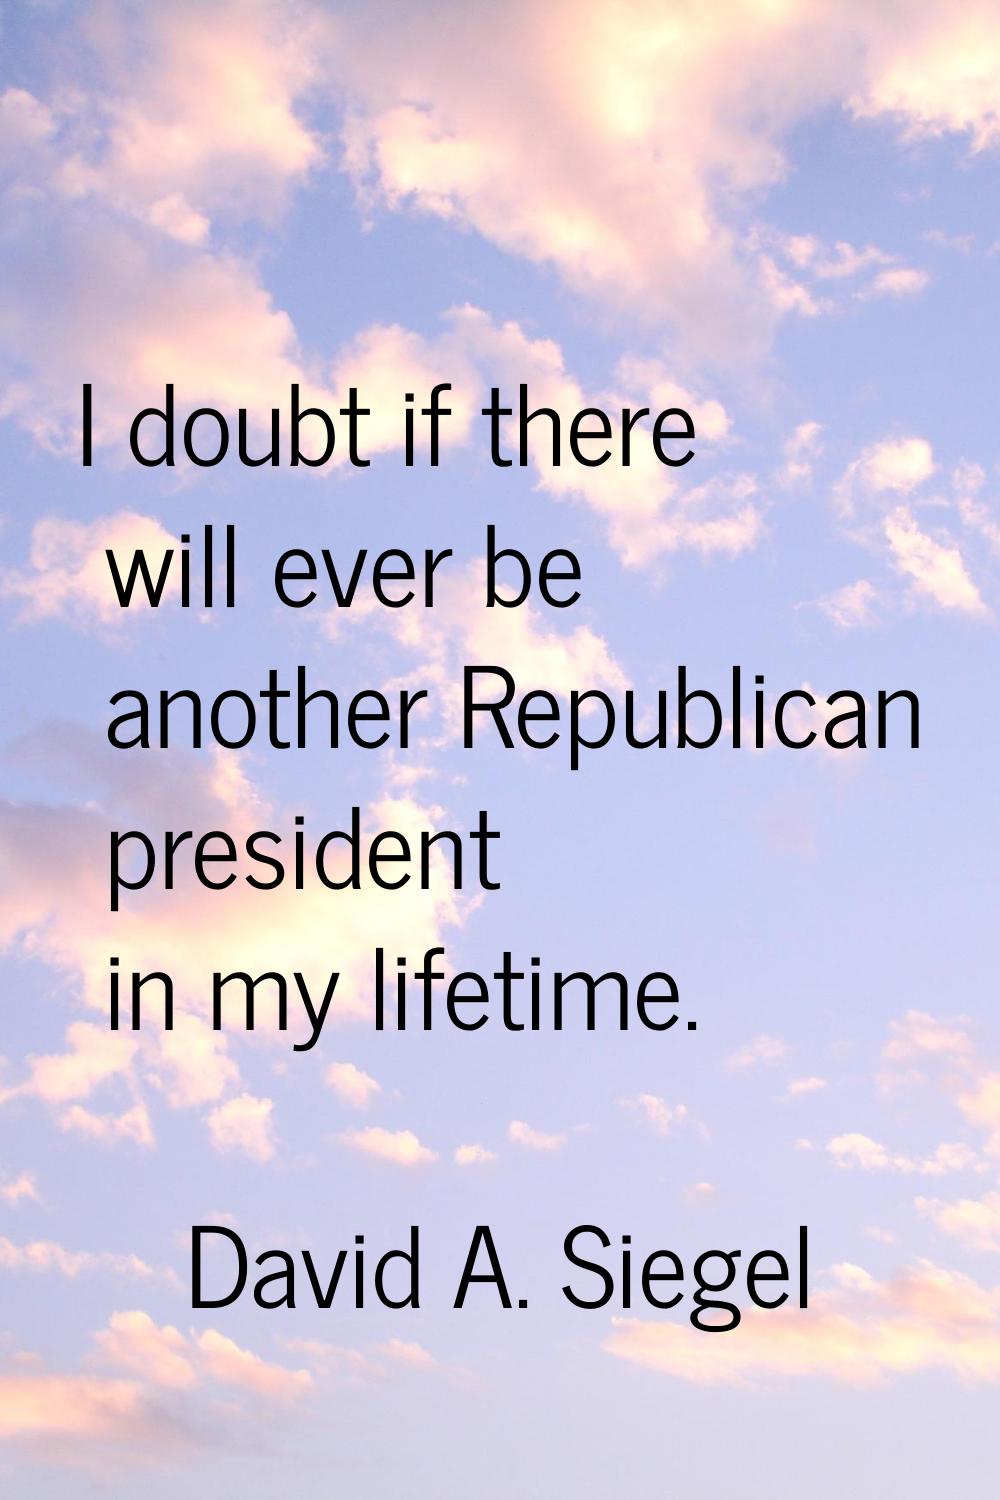 I doubt if there will ever be another Republican president in my lifetime.